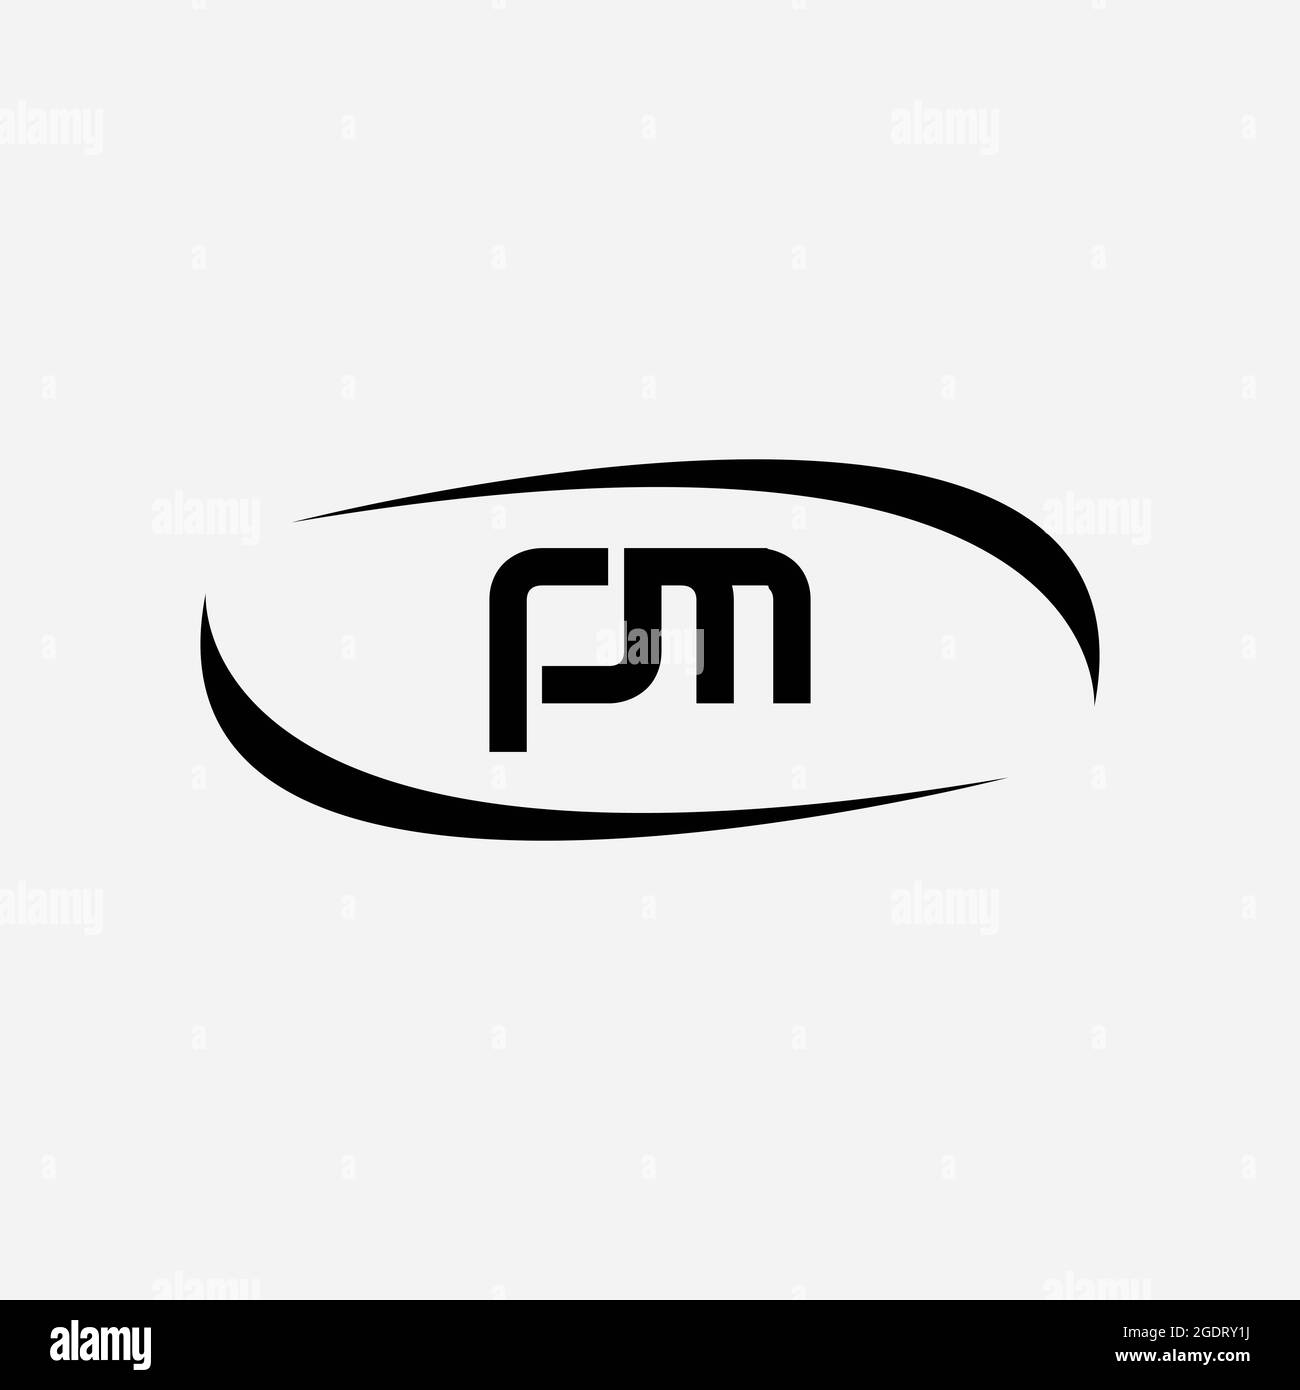 Initial PM Letter Logo with Creative Modern Business Typography